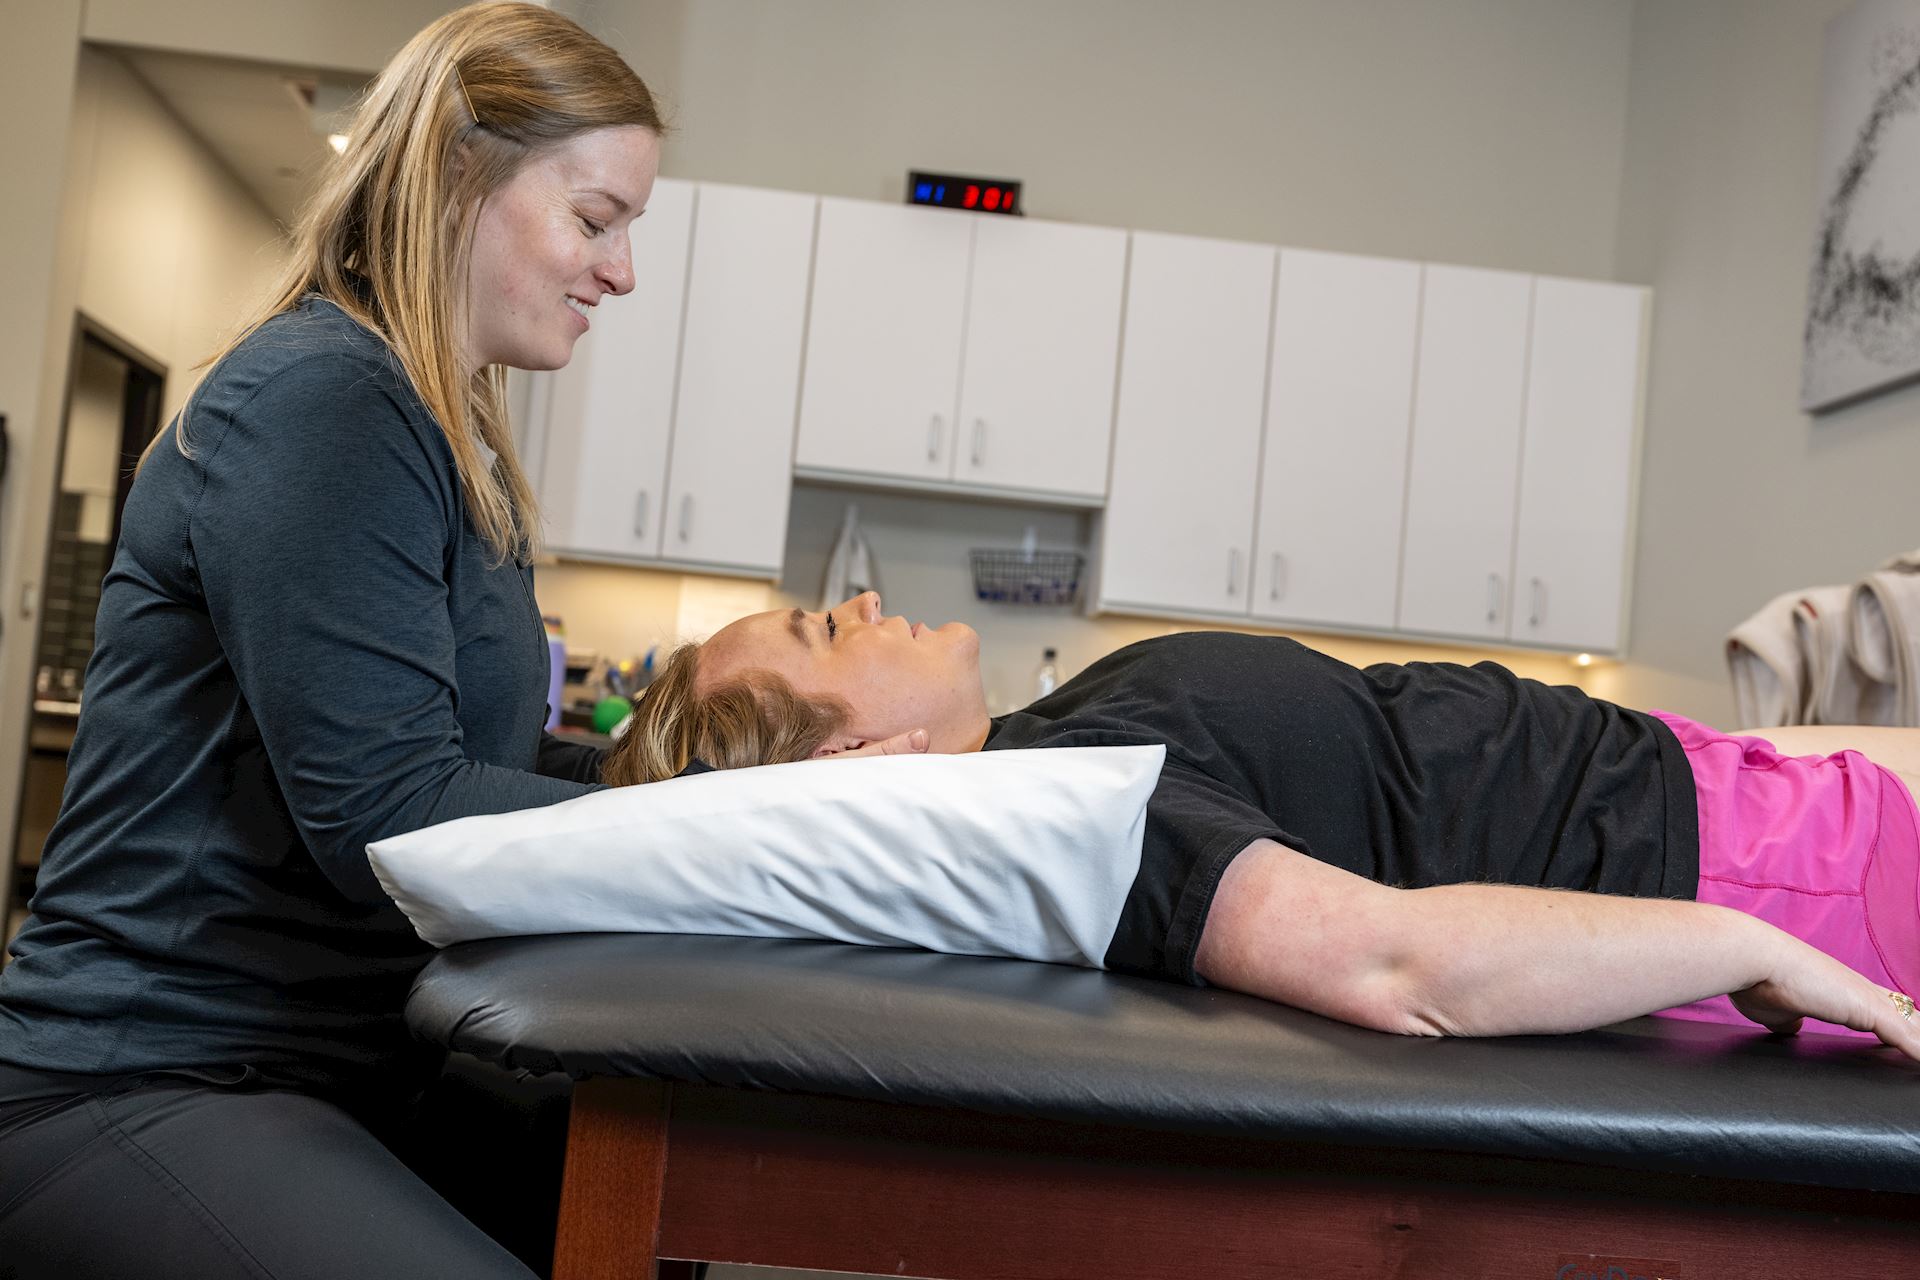 physical therapist working on neck and shoulder area of patient